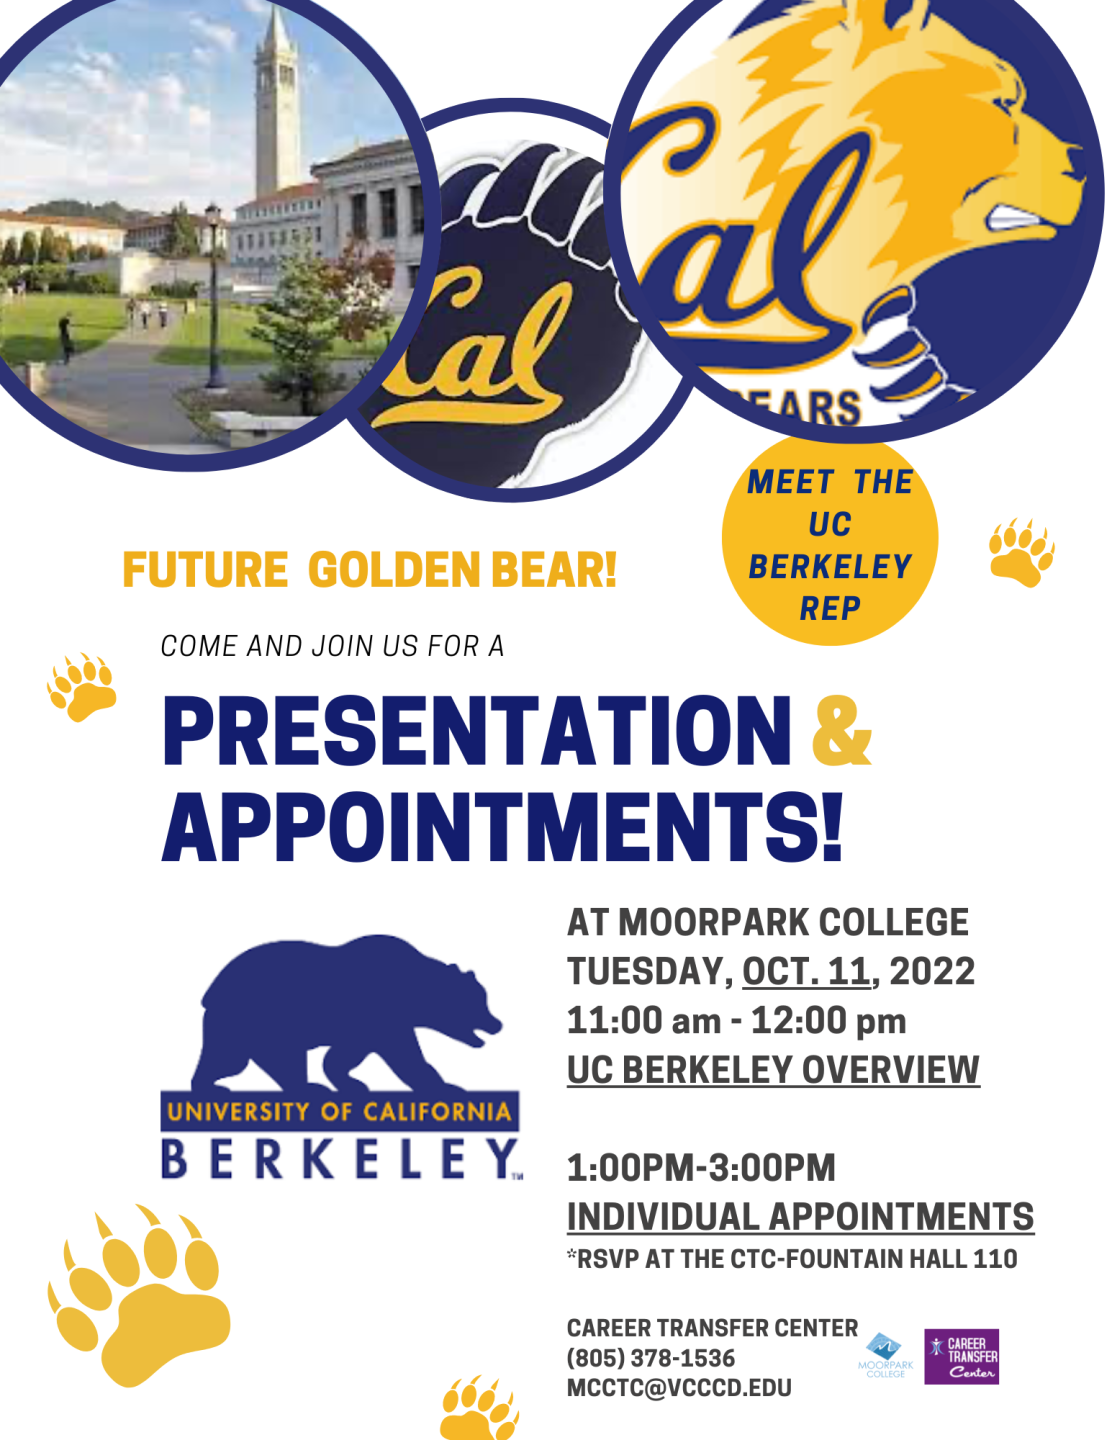 UC Berkeley Appointment flyer